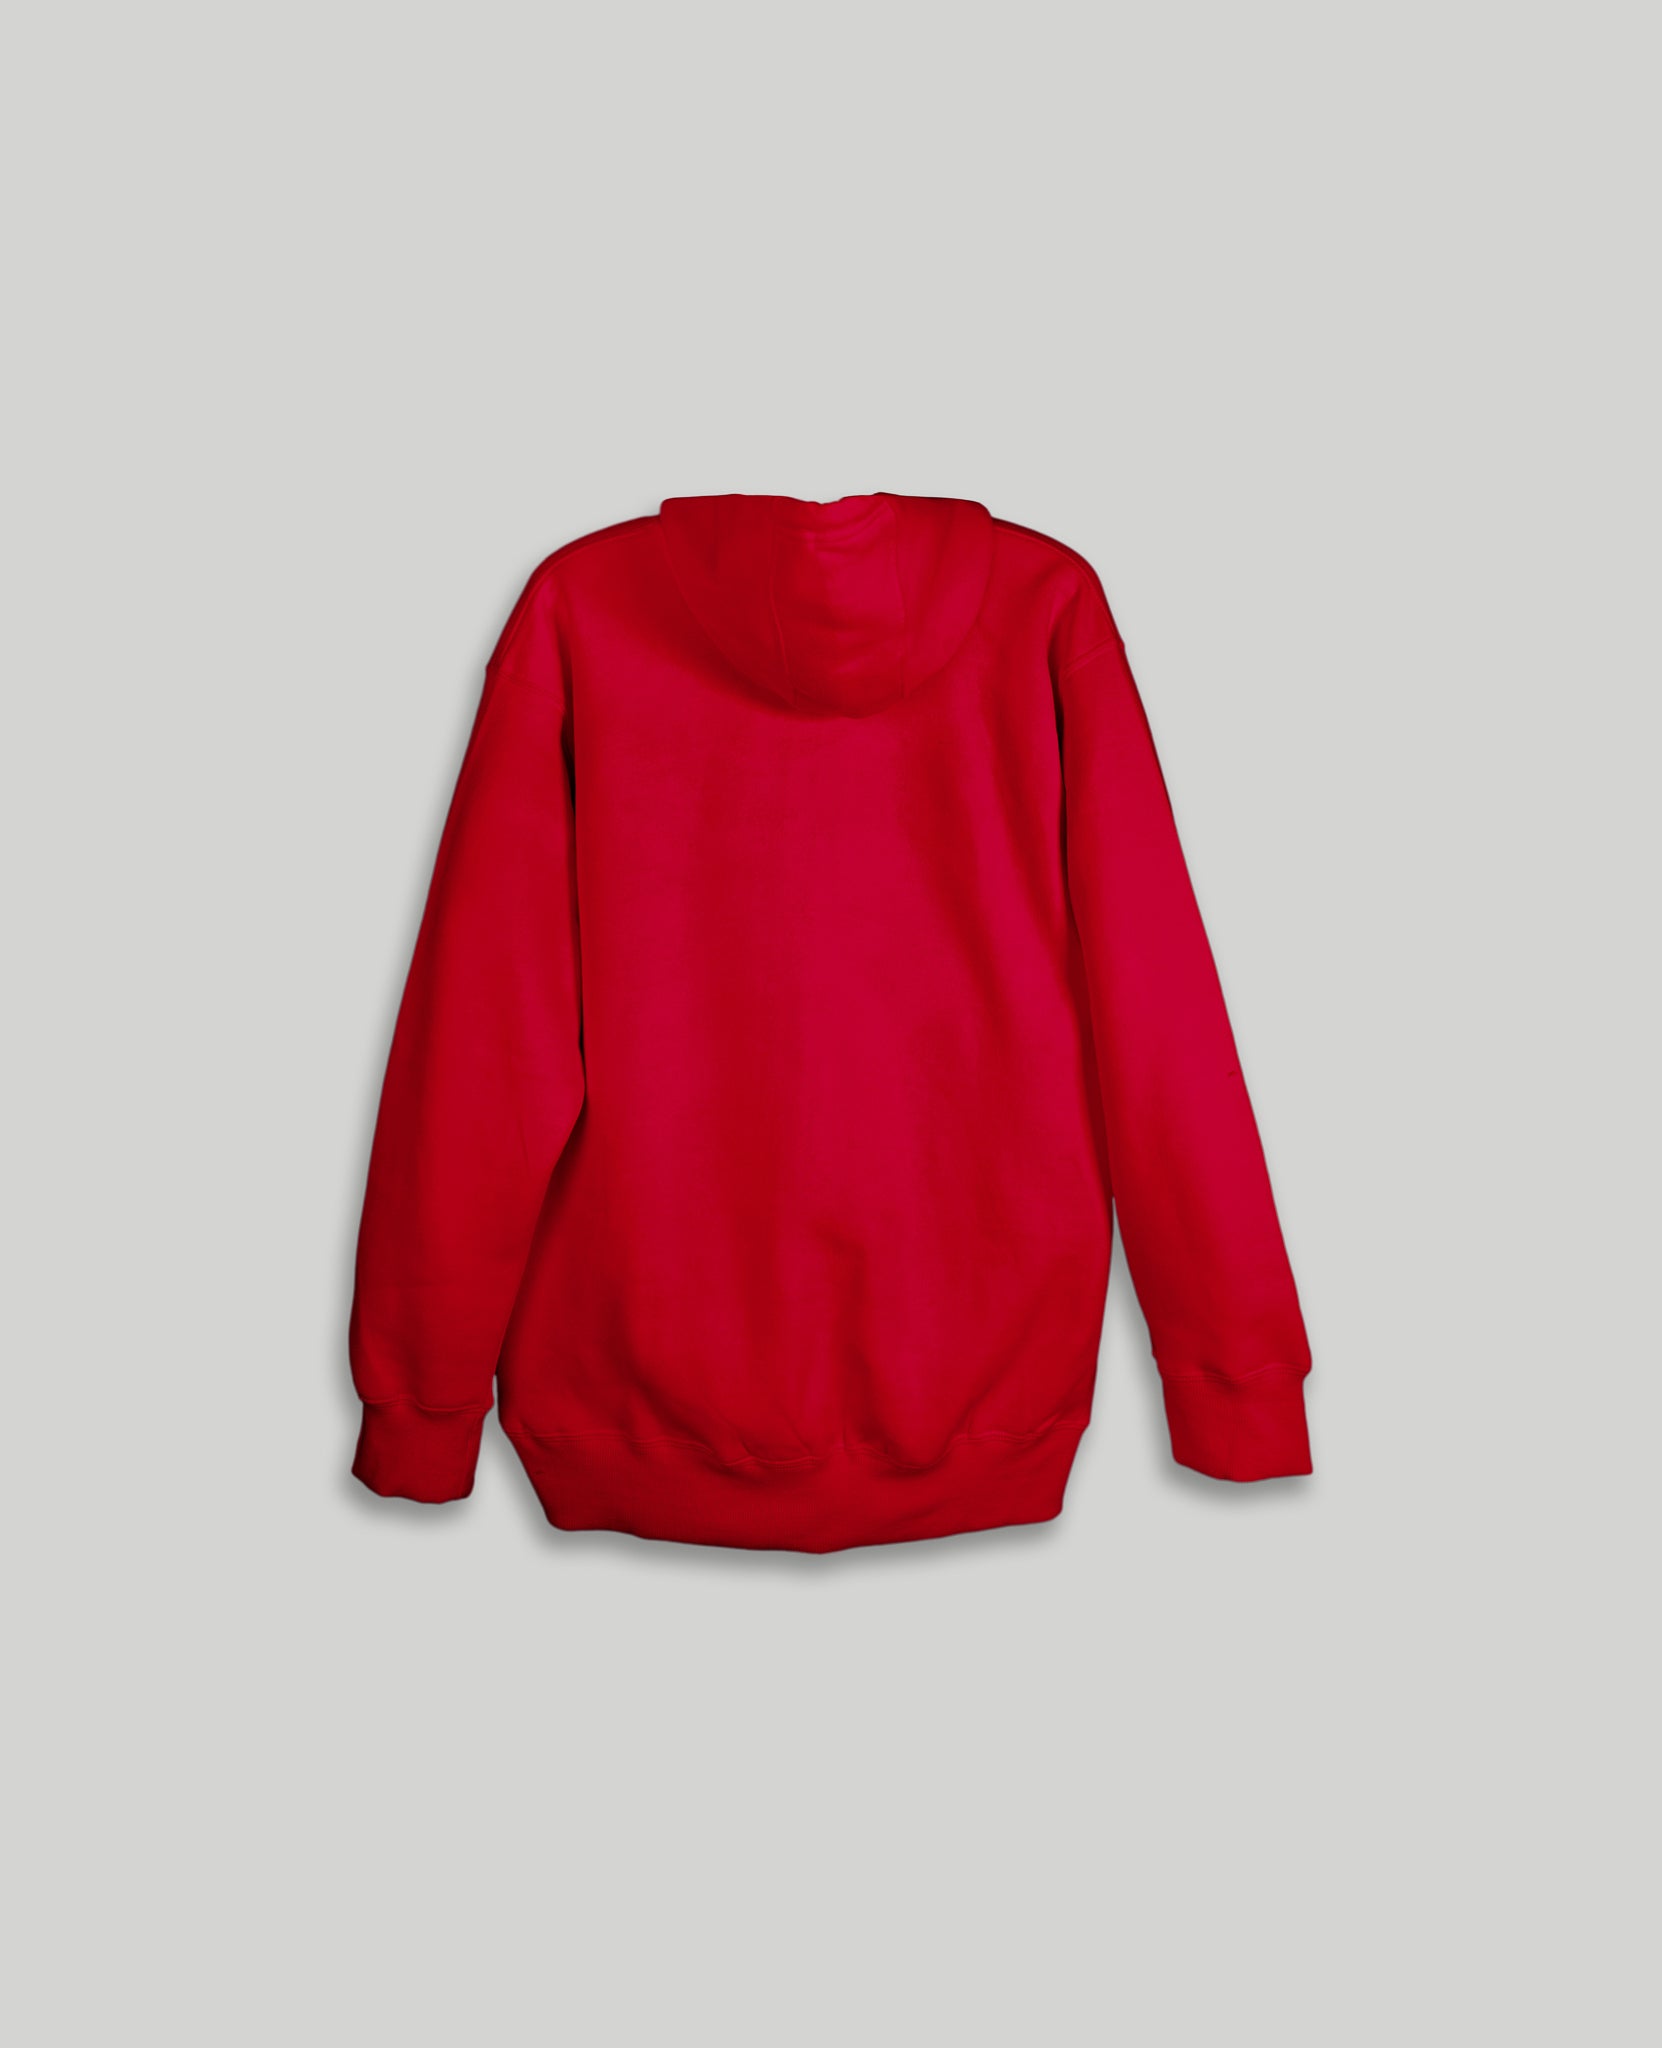 High Quality Red Fleece Hoodie - Weaves & Knits